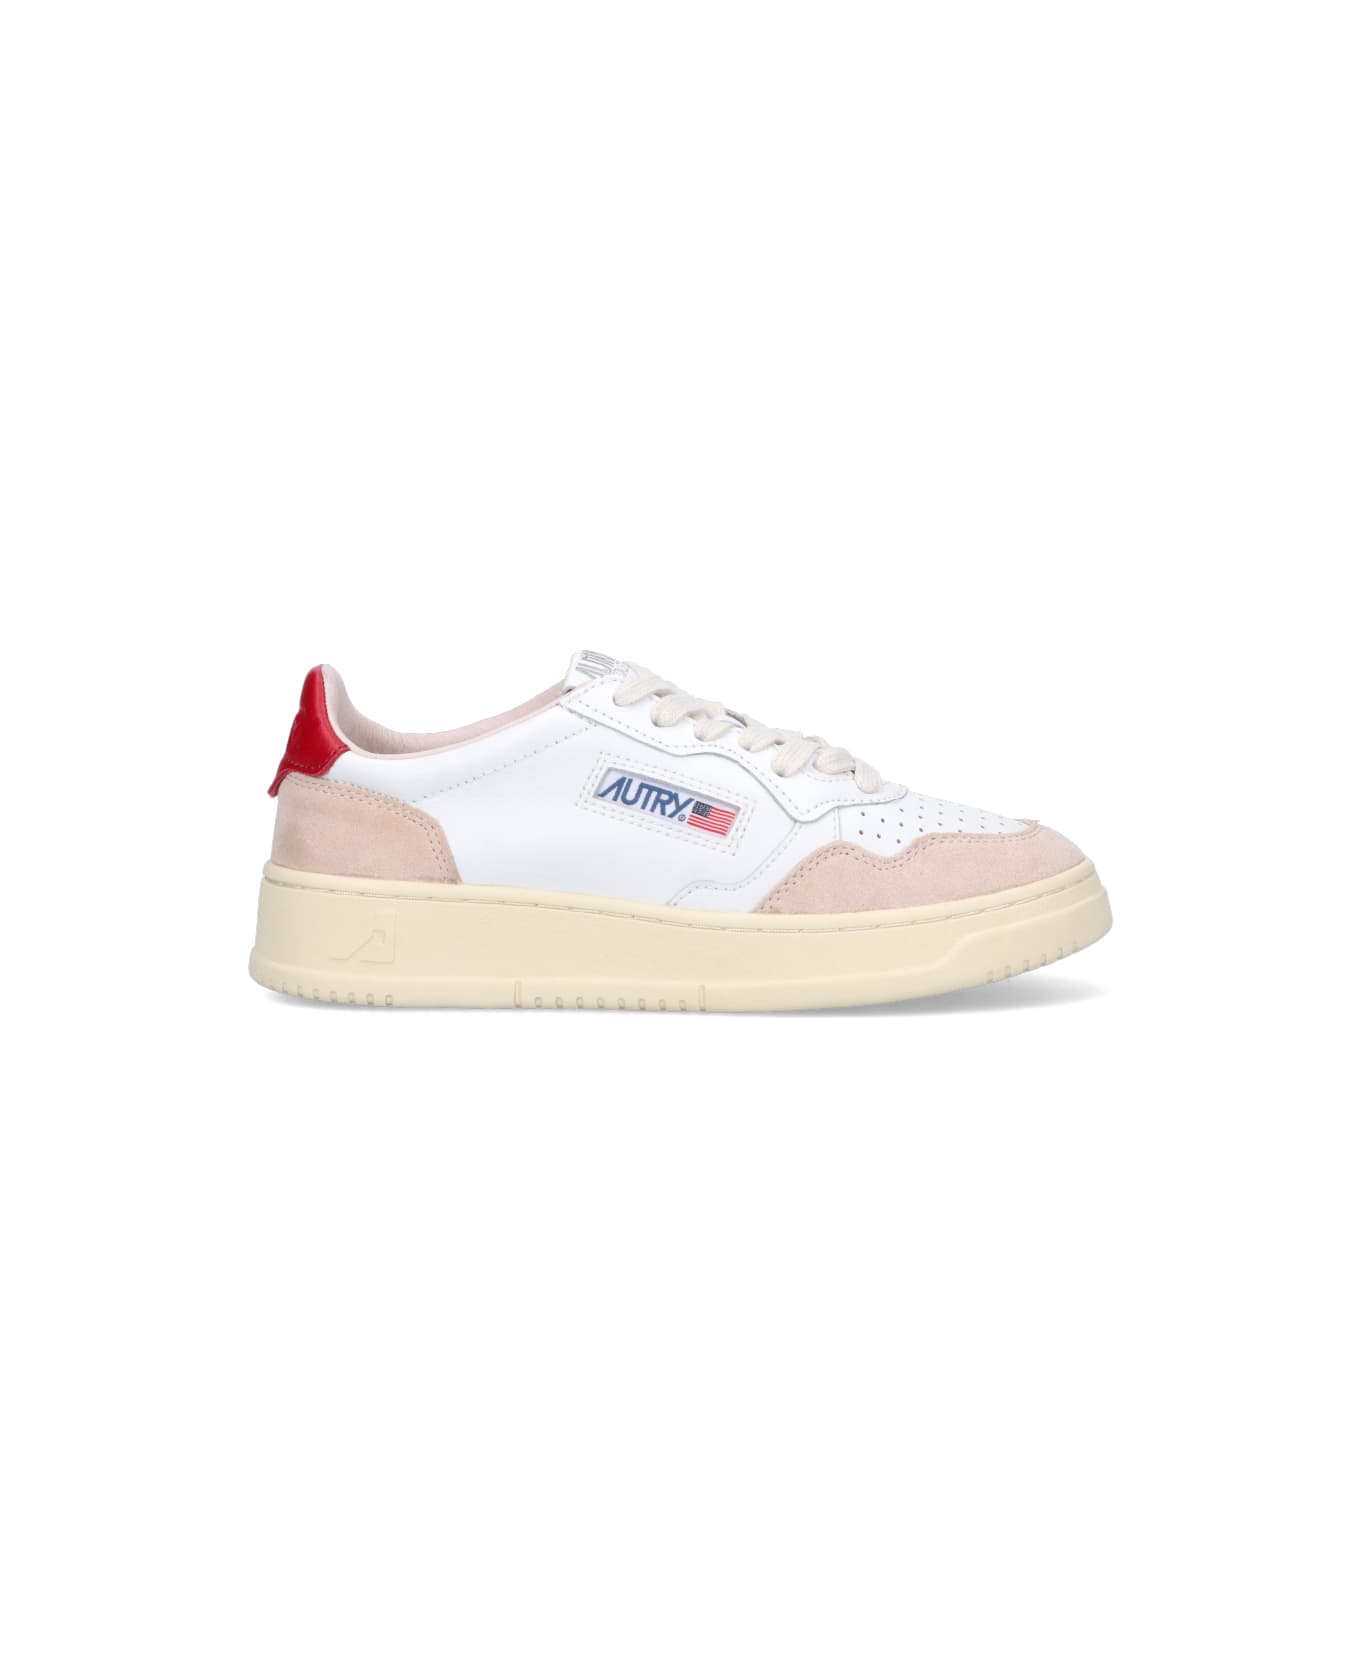 Autry 01 Sneakers In White Suede And Leather - White